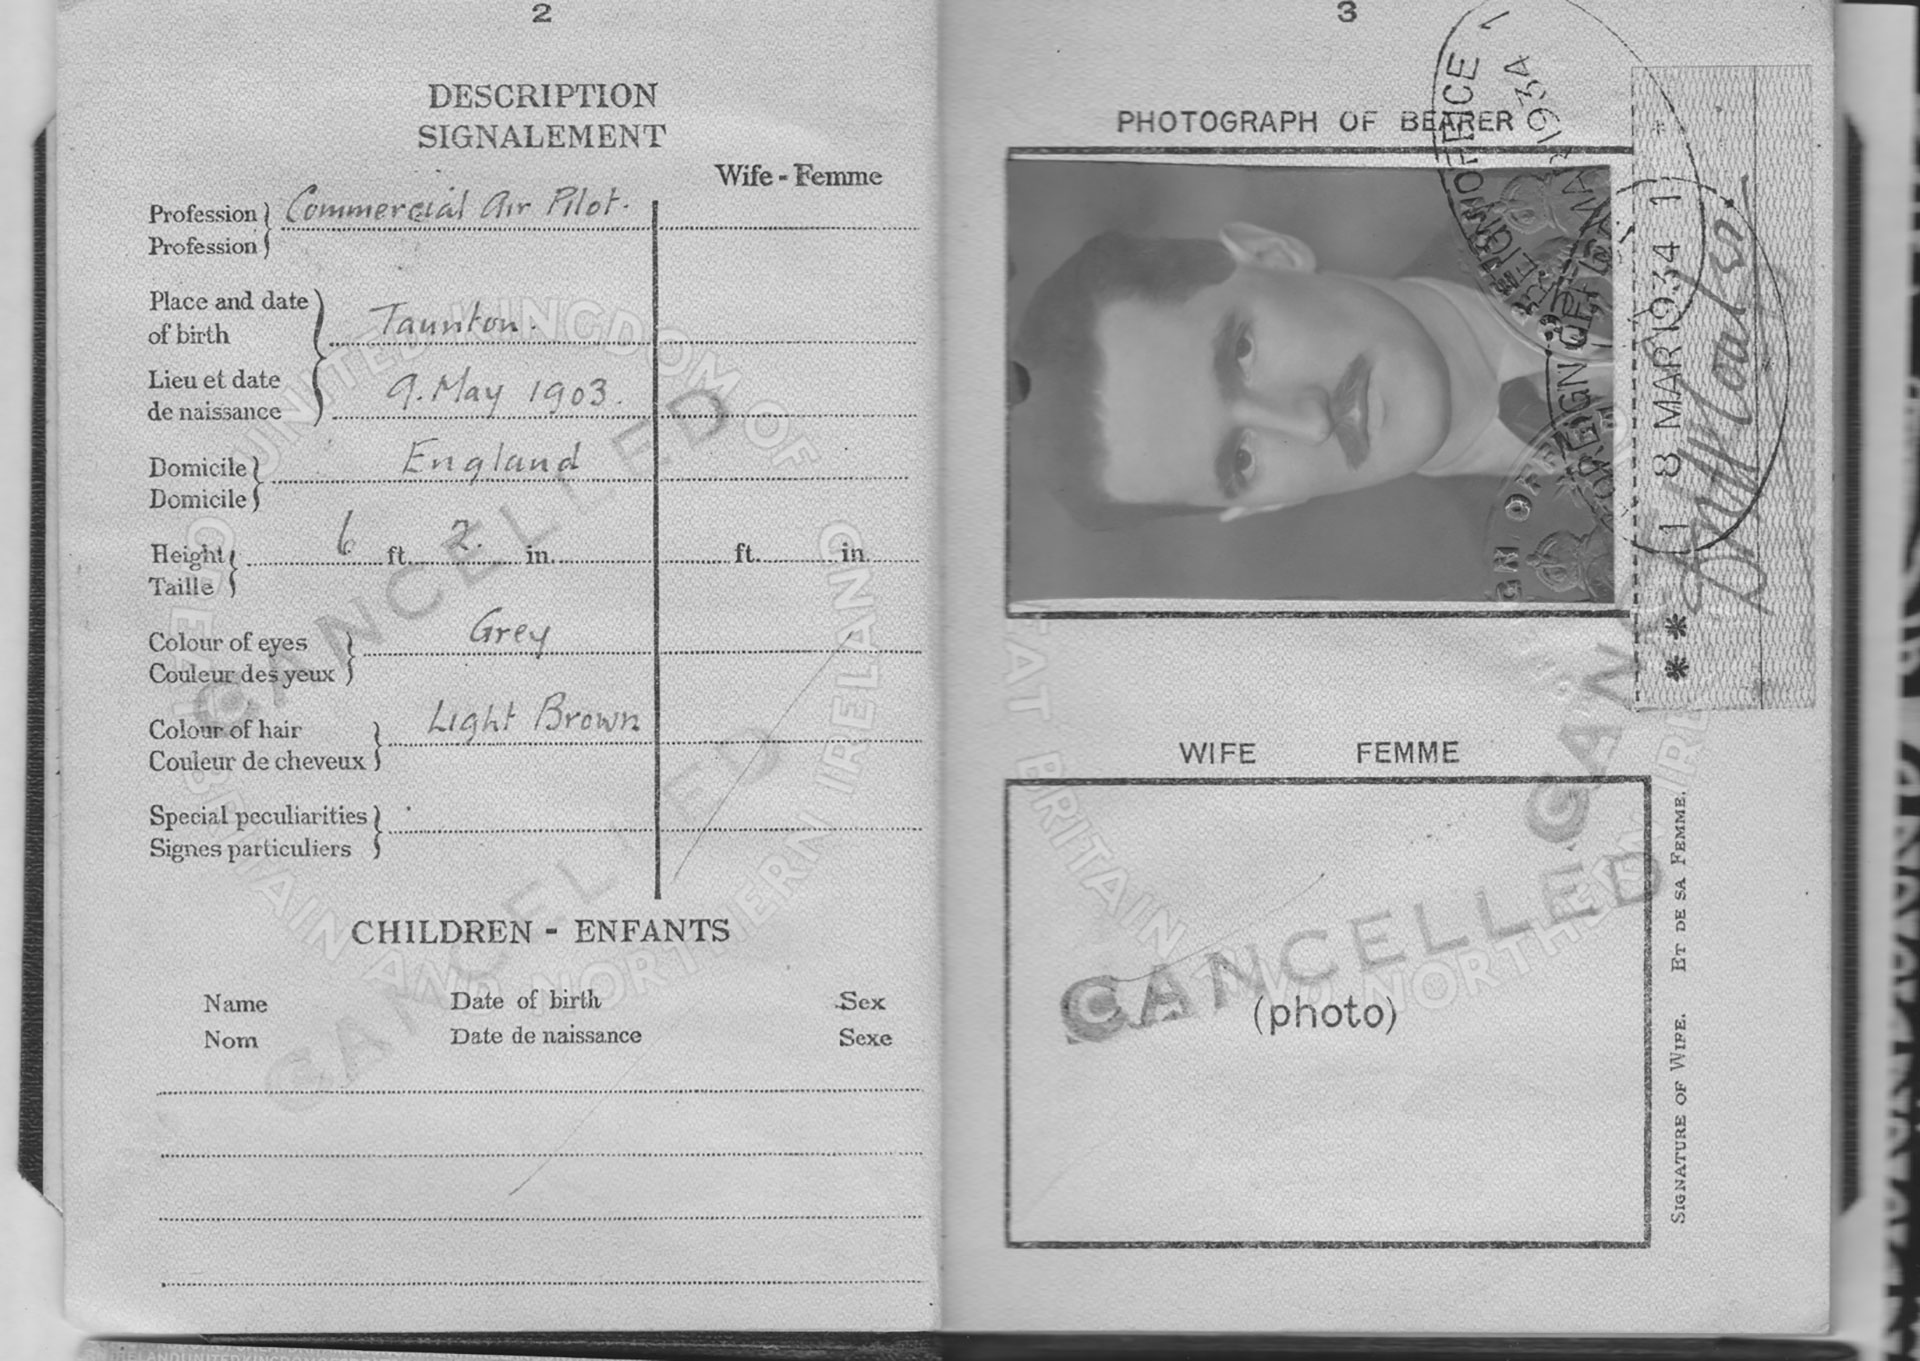 (Passport pages with “Commercial Air Pilot” notations) Both of Coates’ British passports (one shown) indicate that he was a “commercial air pilot” in Mexico, the Caribbean, and in South and Central America, from the early 1930s through the mid-1940s.  He also traveled to Finland in 1939, and to Canada in the 1940s.